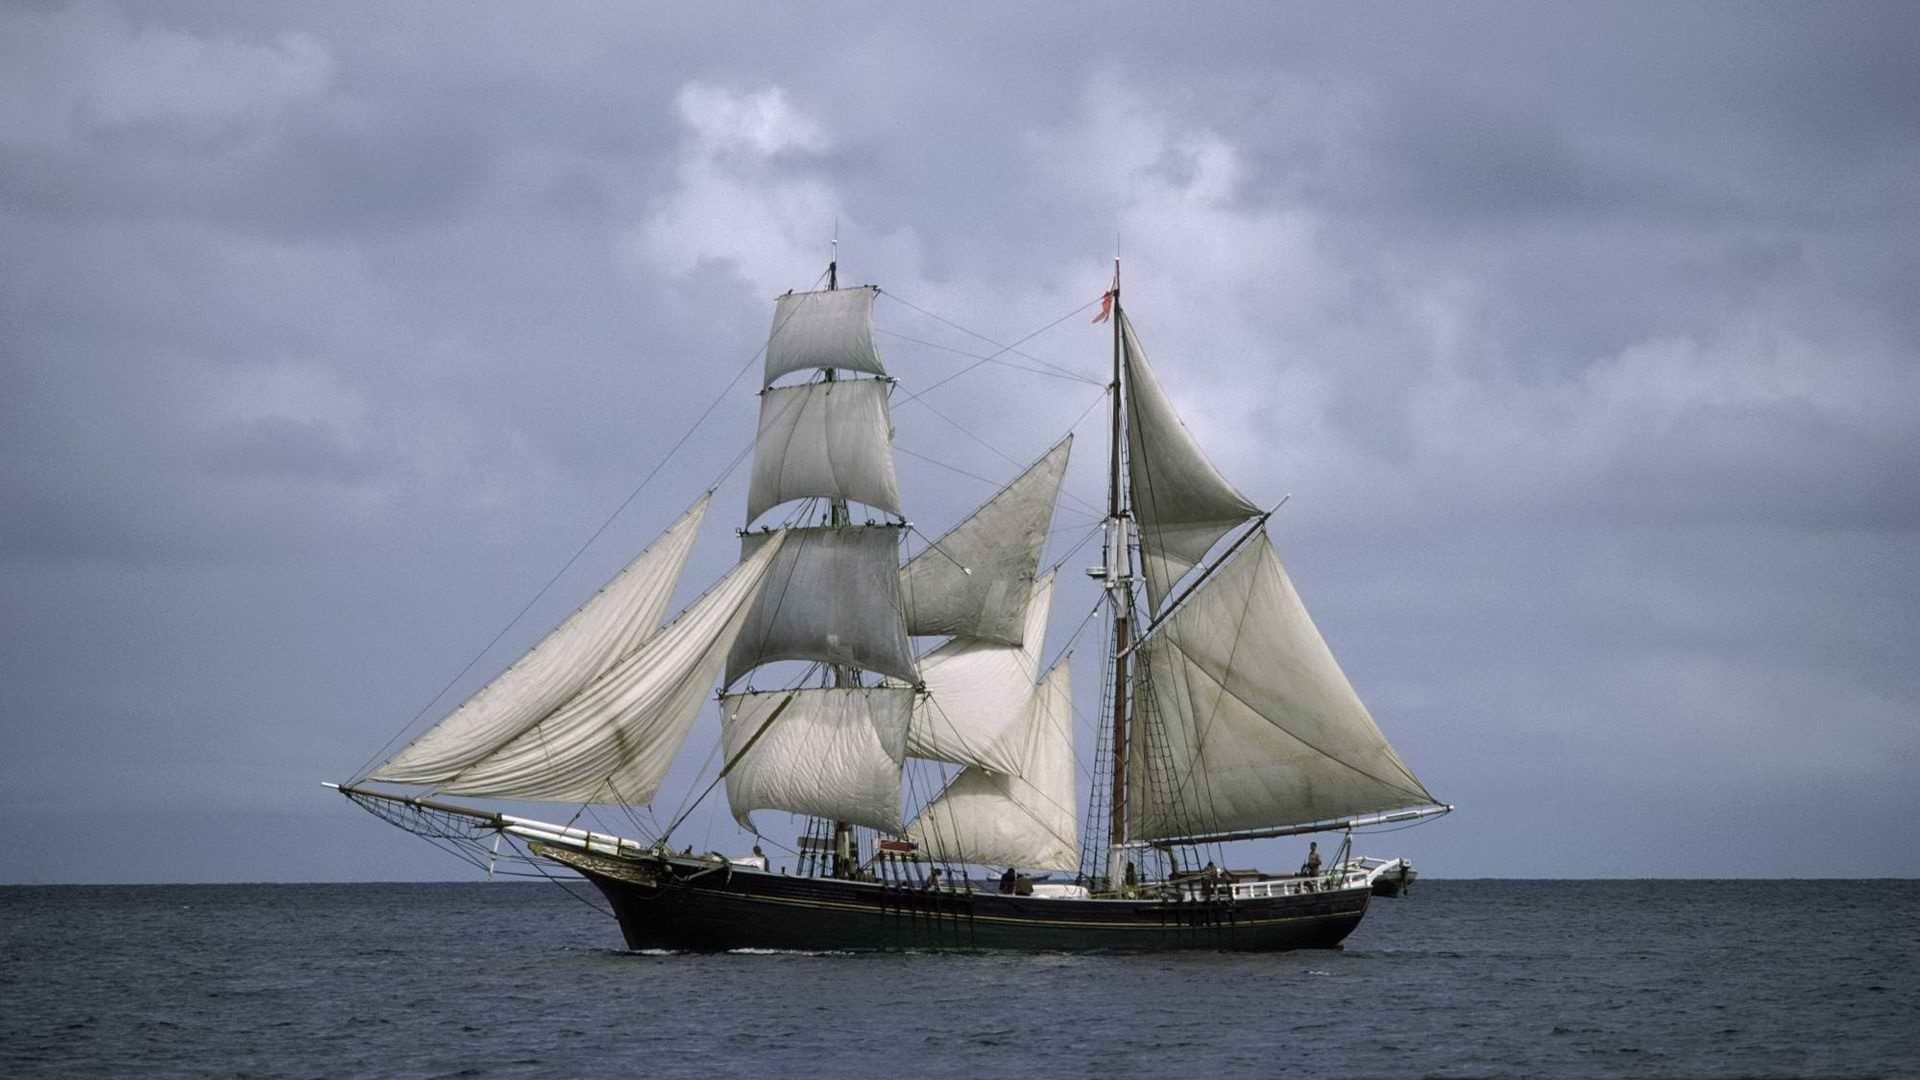 Schooner: Tall ships, Boat, A sailing ship with its sails parallel to the length of the ship. 1920x1080 Full HD Background.